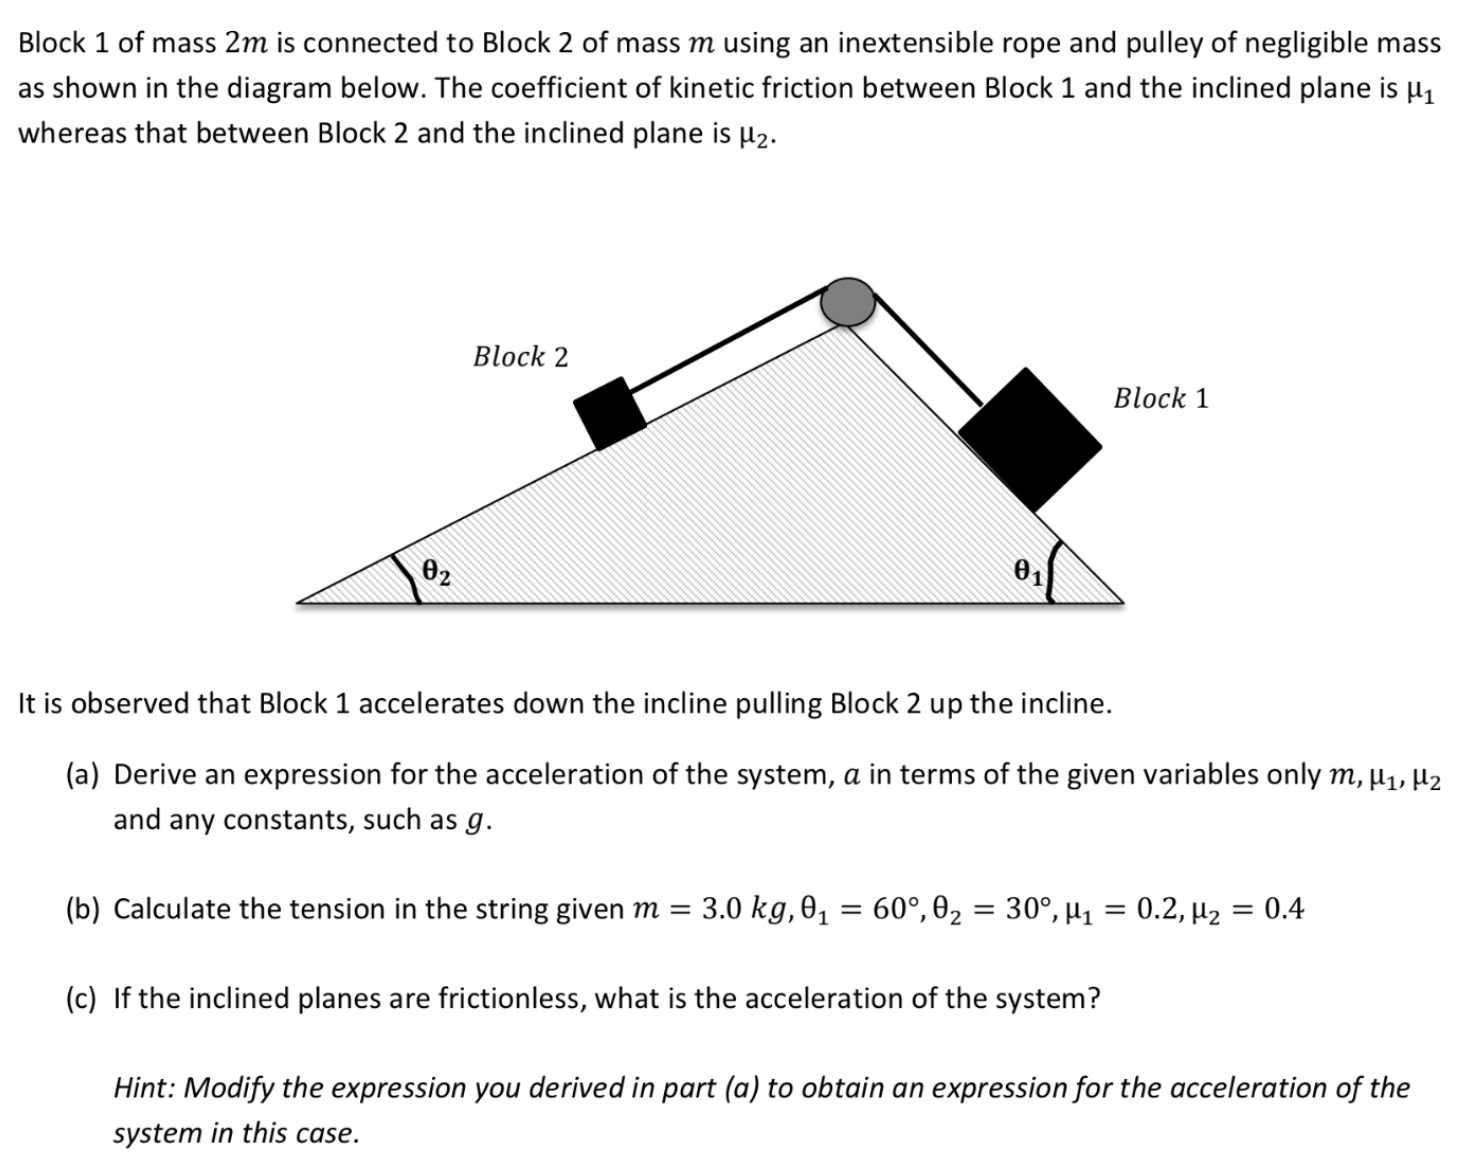 Block 1 of mass 2 m is connected to Block 2 of mass m using an inextensible rope and pulley of negligible mass as shown in the diagram below. The coefficient of kinetic friction between Block 1 and the inclined plane is μ1 whereas that between Block 2 and the inclined plane is μ2. It is observed that Block 1 accelerates down the incline pulling Block 2 up the incline. (a) Derive an expression for the acceleration of the system, a in terms of the given variables only m, μ1, μ2 and any constants, such as g. (b) Calculate the tension in the string given m = 3.0 kg, θ1 = 60∘, θ2 = 30∘, μ1 = 0.2, μ2 = 0.4 (c) If the inclined planes are frictionless, what is the acceleration of the system? Hint: Modify the expression you derived in part (a) to obtain an expression for the acceleration of the system in this case.